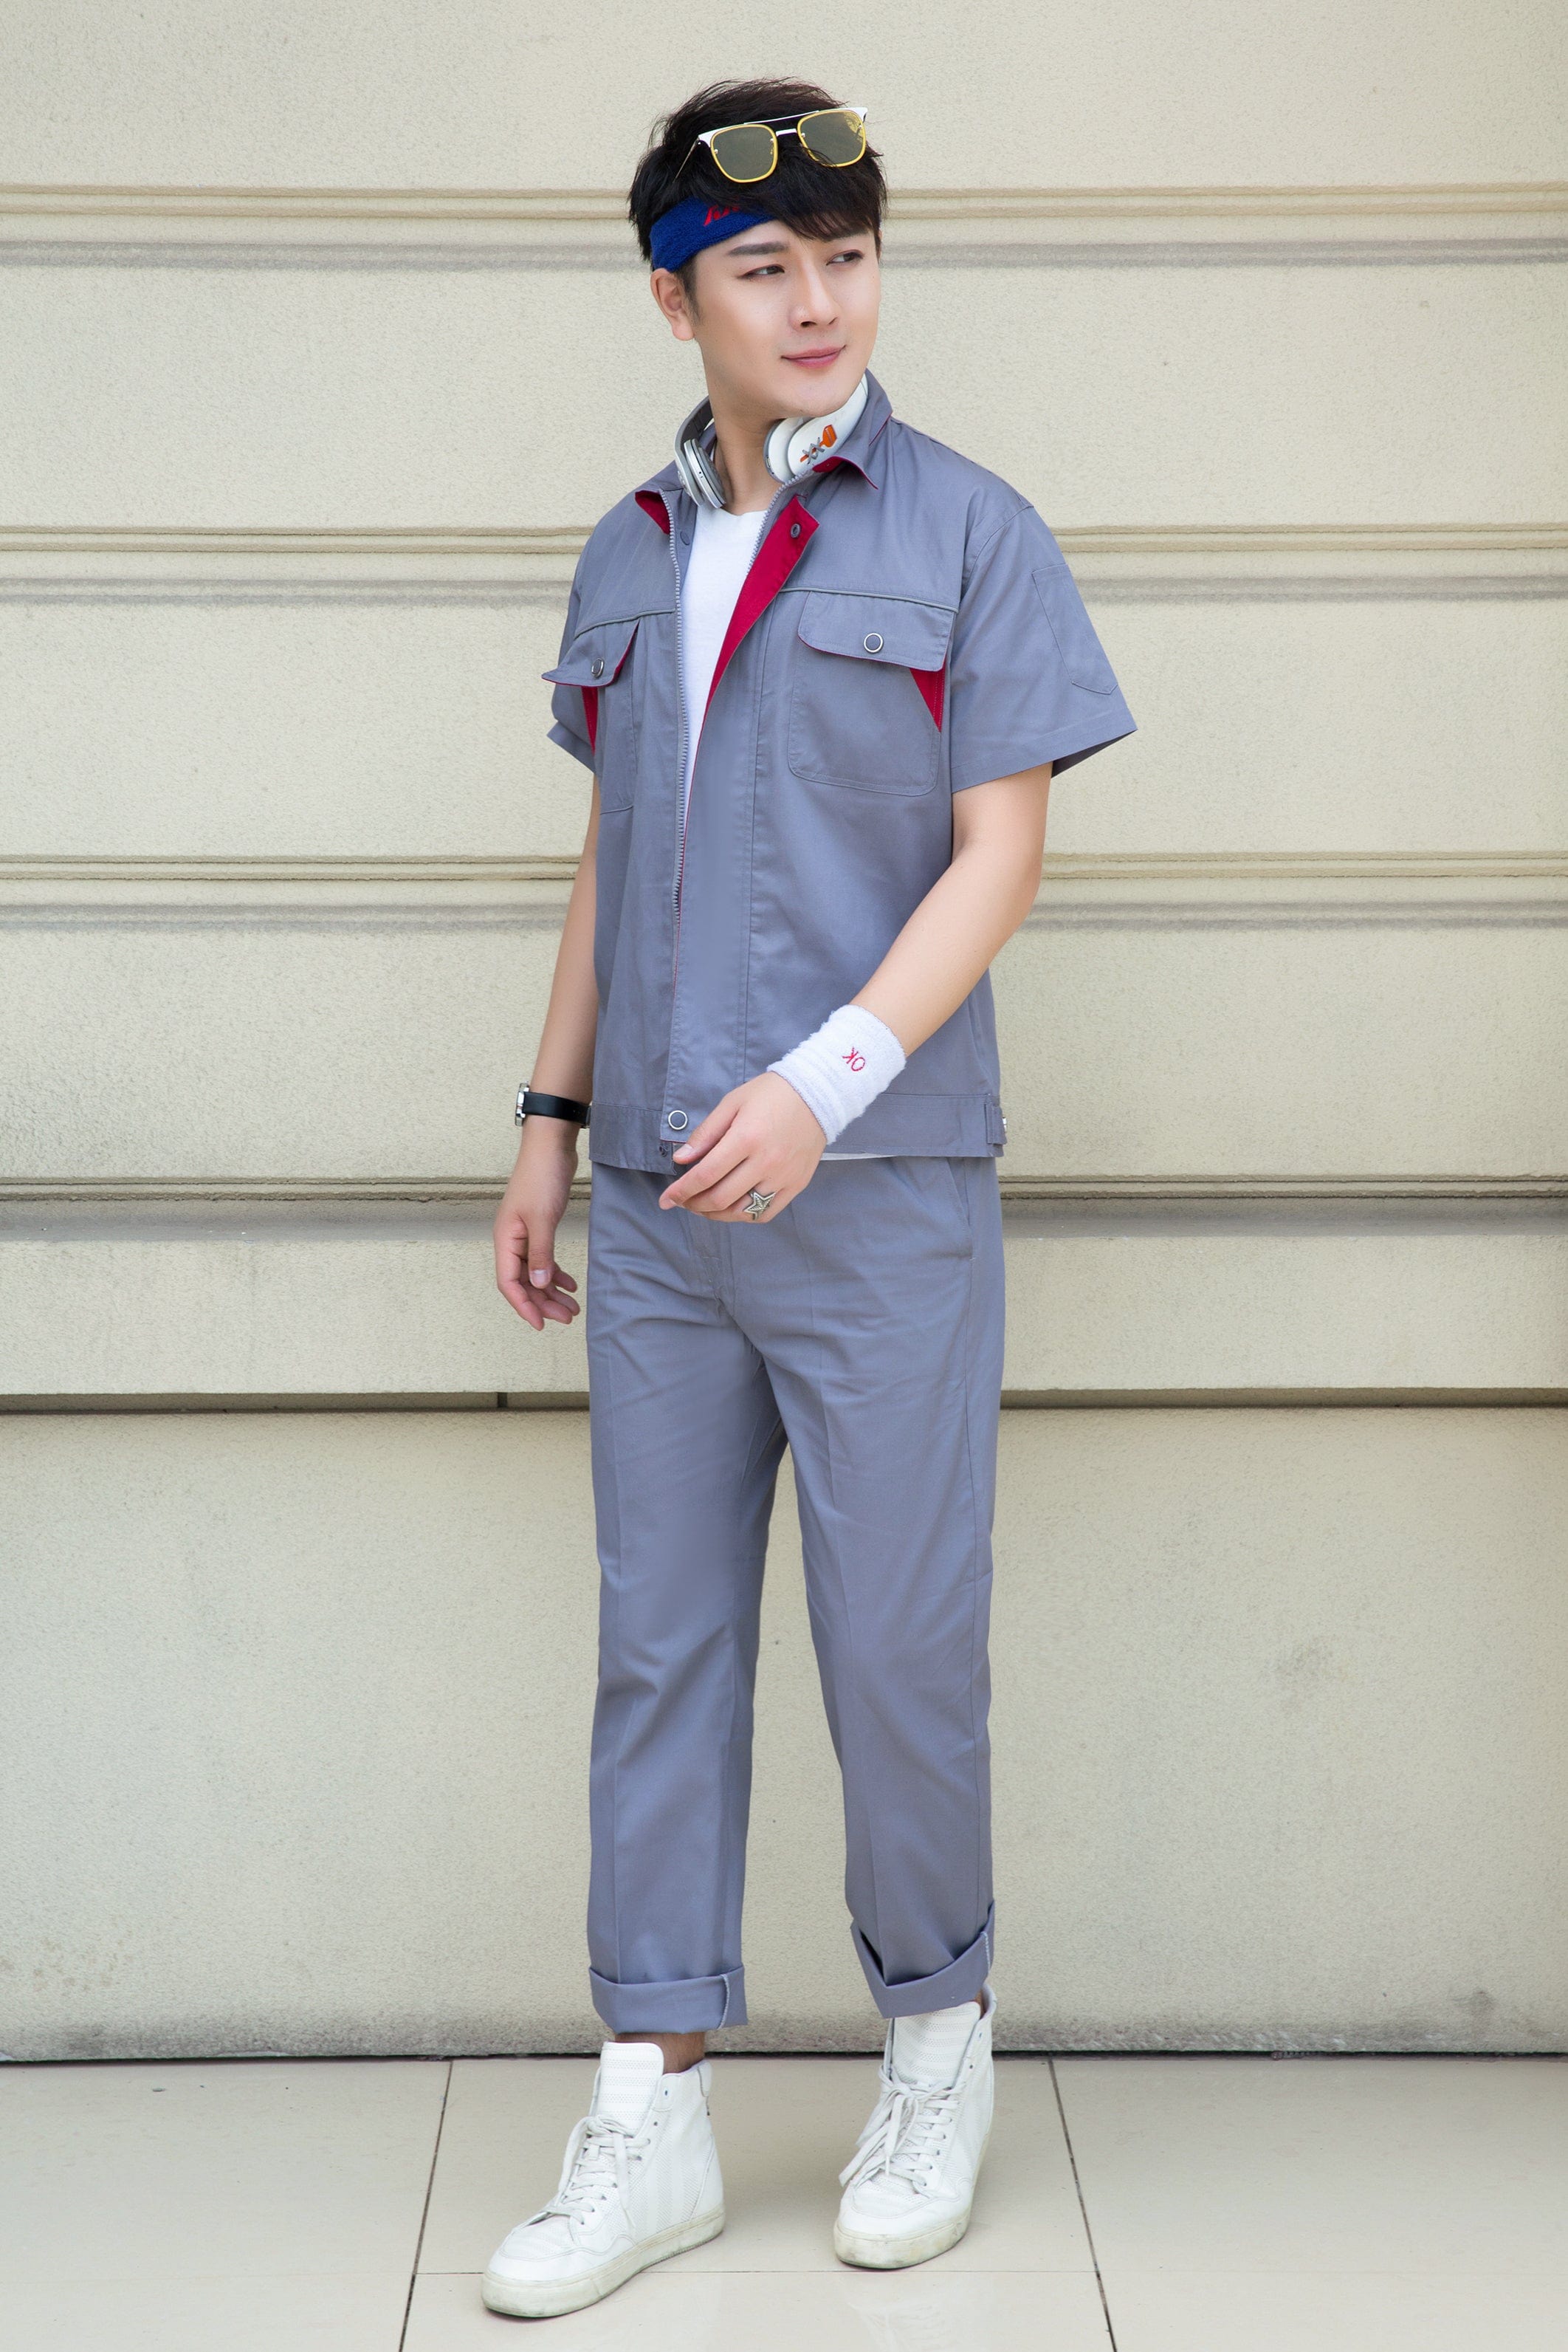 Corals Trading Co. 可樂思百貨商行 涤棉 Short-sleeved polyester cotton overalls for summer SD-S703